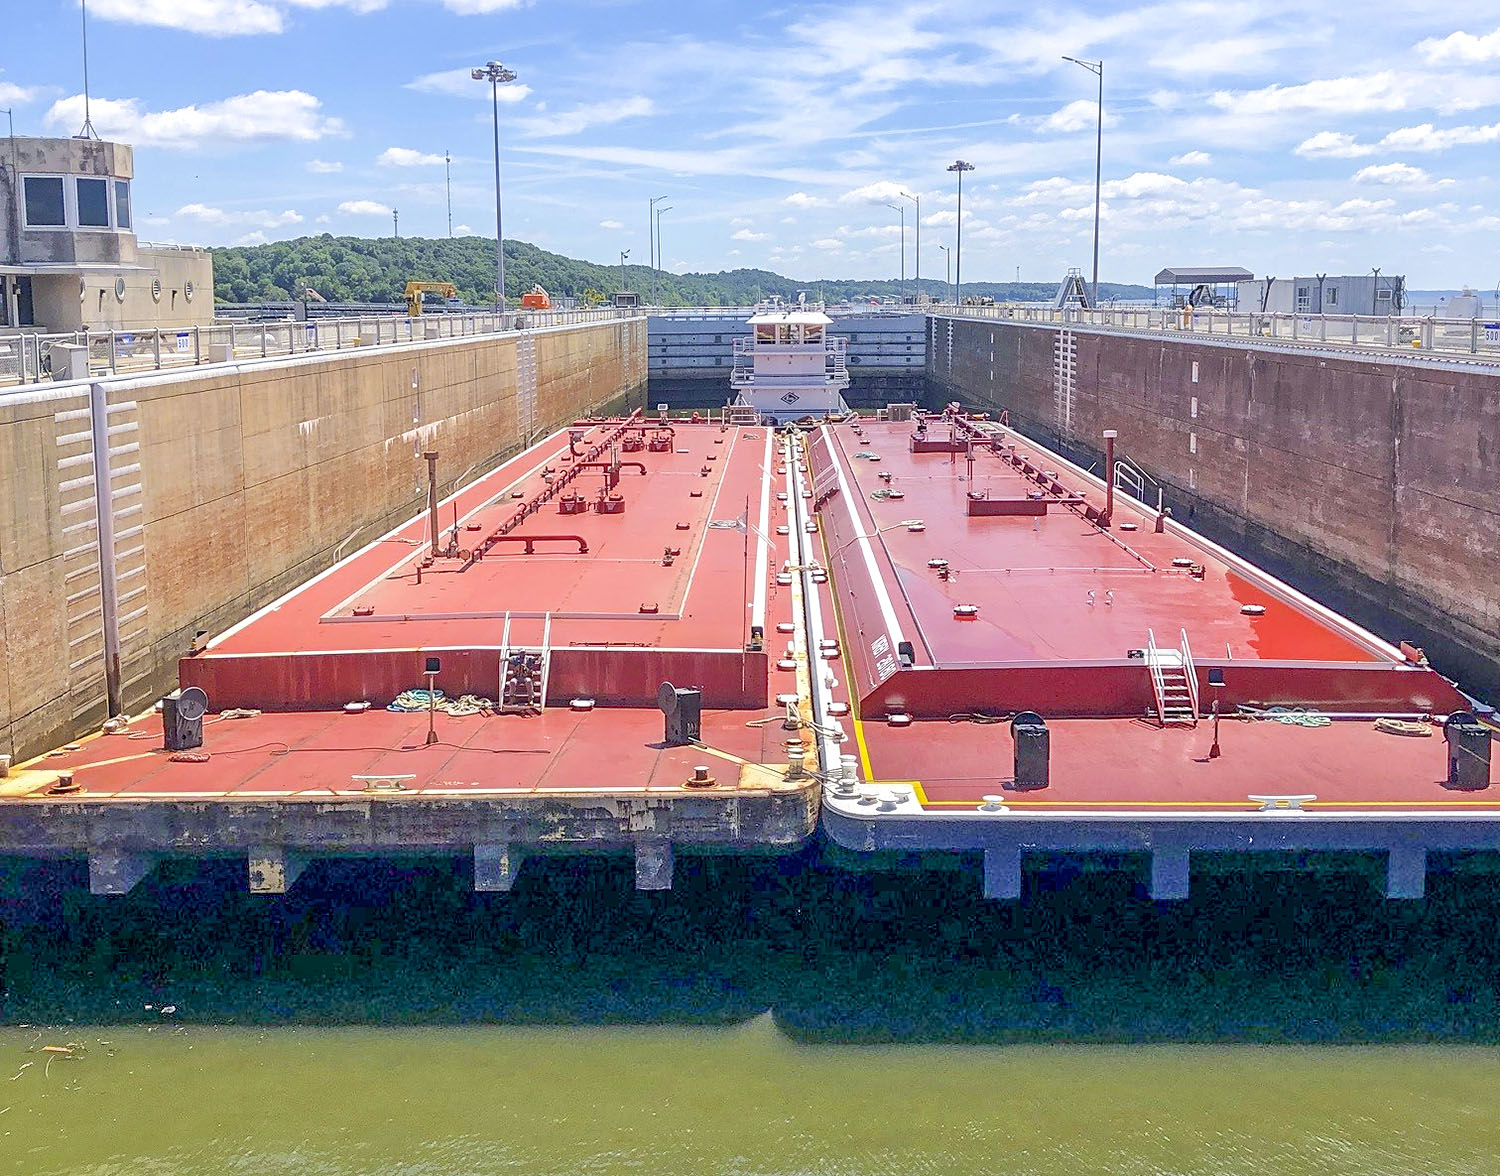 A downbound tow locks empty chemical barges through the Kentucky Lock on August 12. (Photo courtesy of Lockmaster Caleb Skinner)